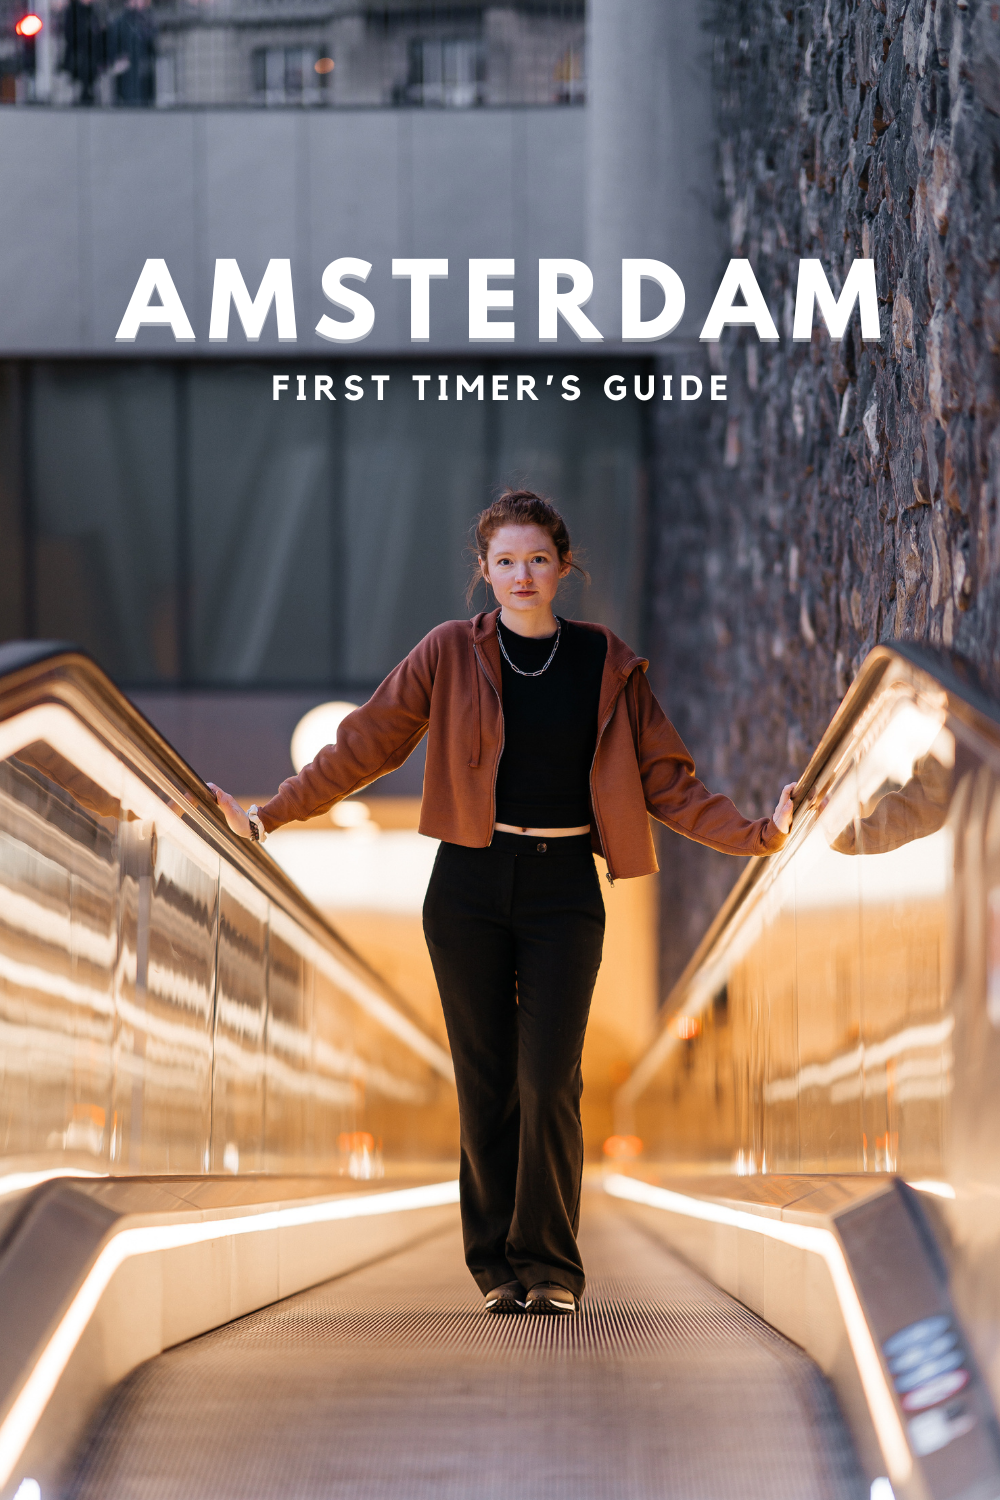 A First Timer's Guide to Amsterdam - Read more for tips and tricks on how to make your stay in Amsterdam easy and unforgettable. 